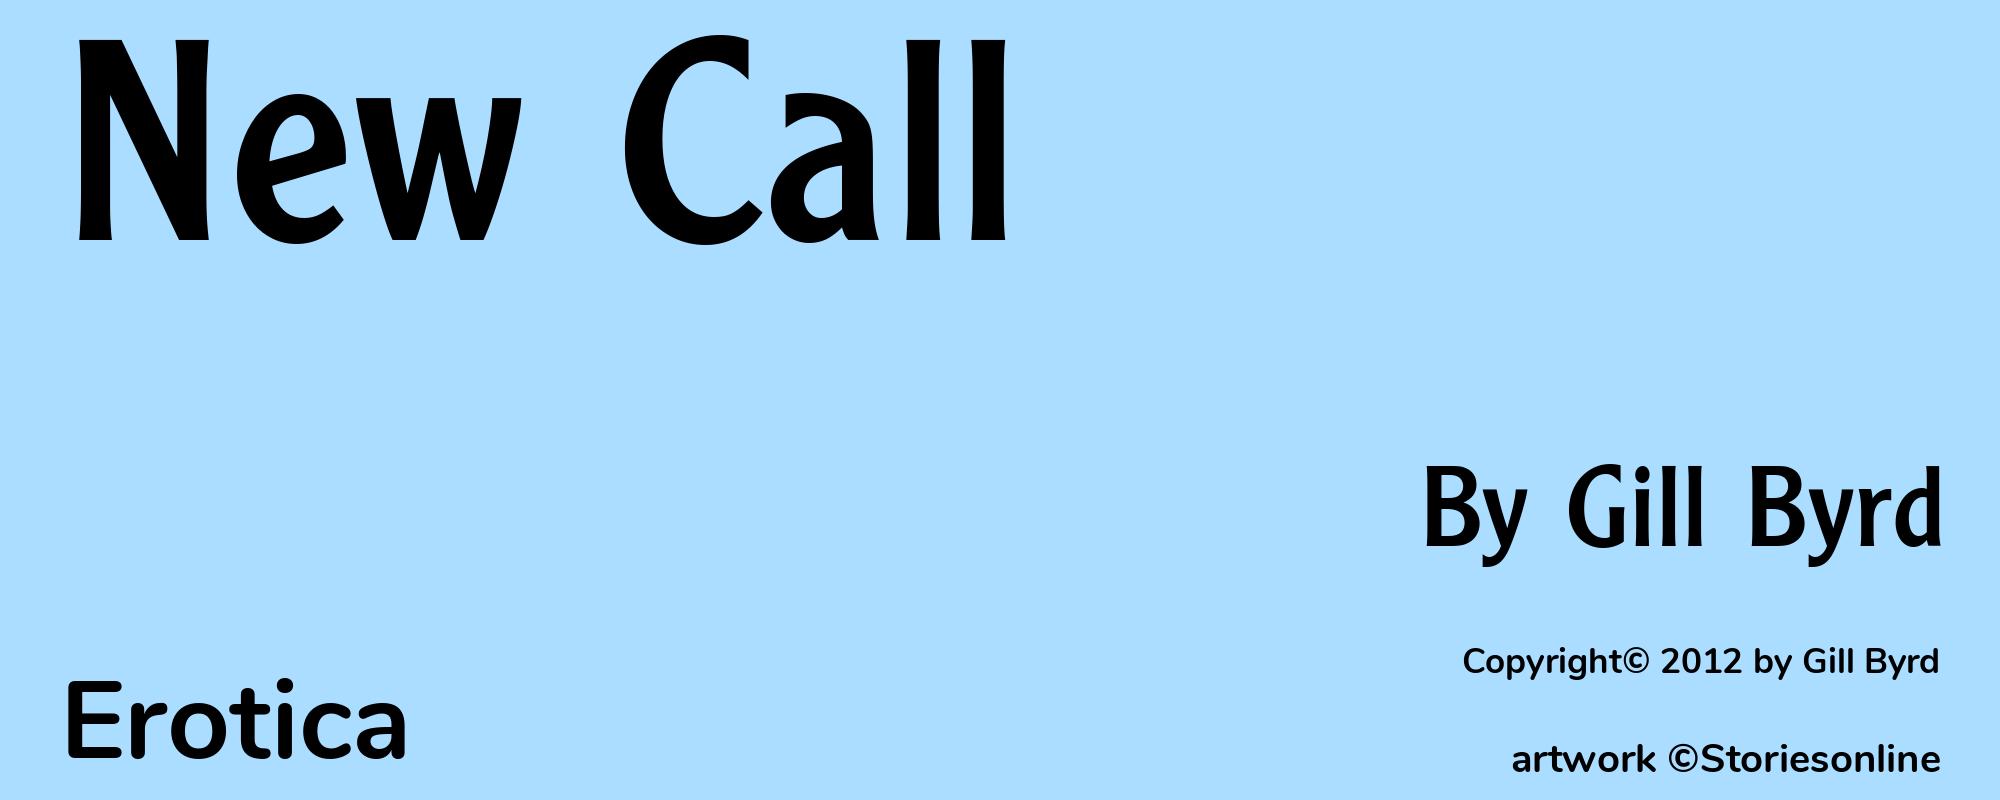 New Call - Cover